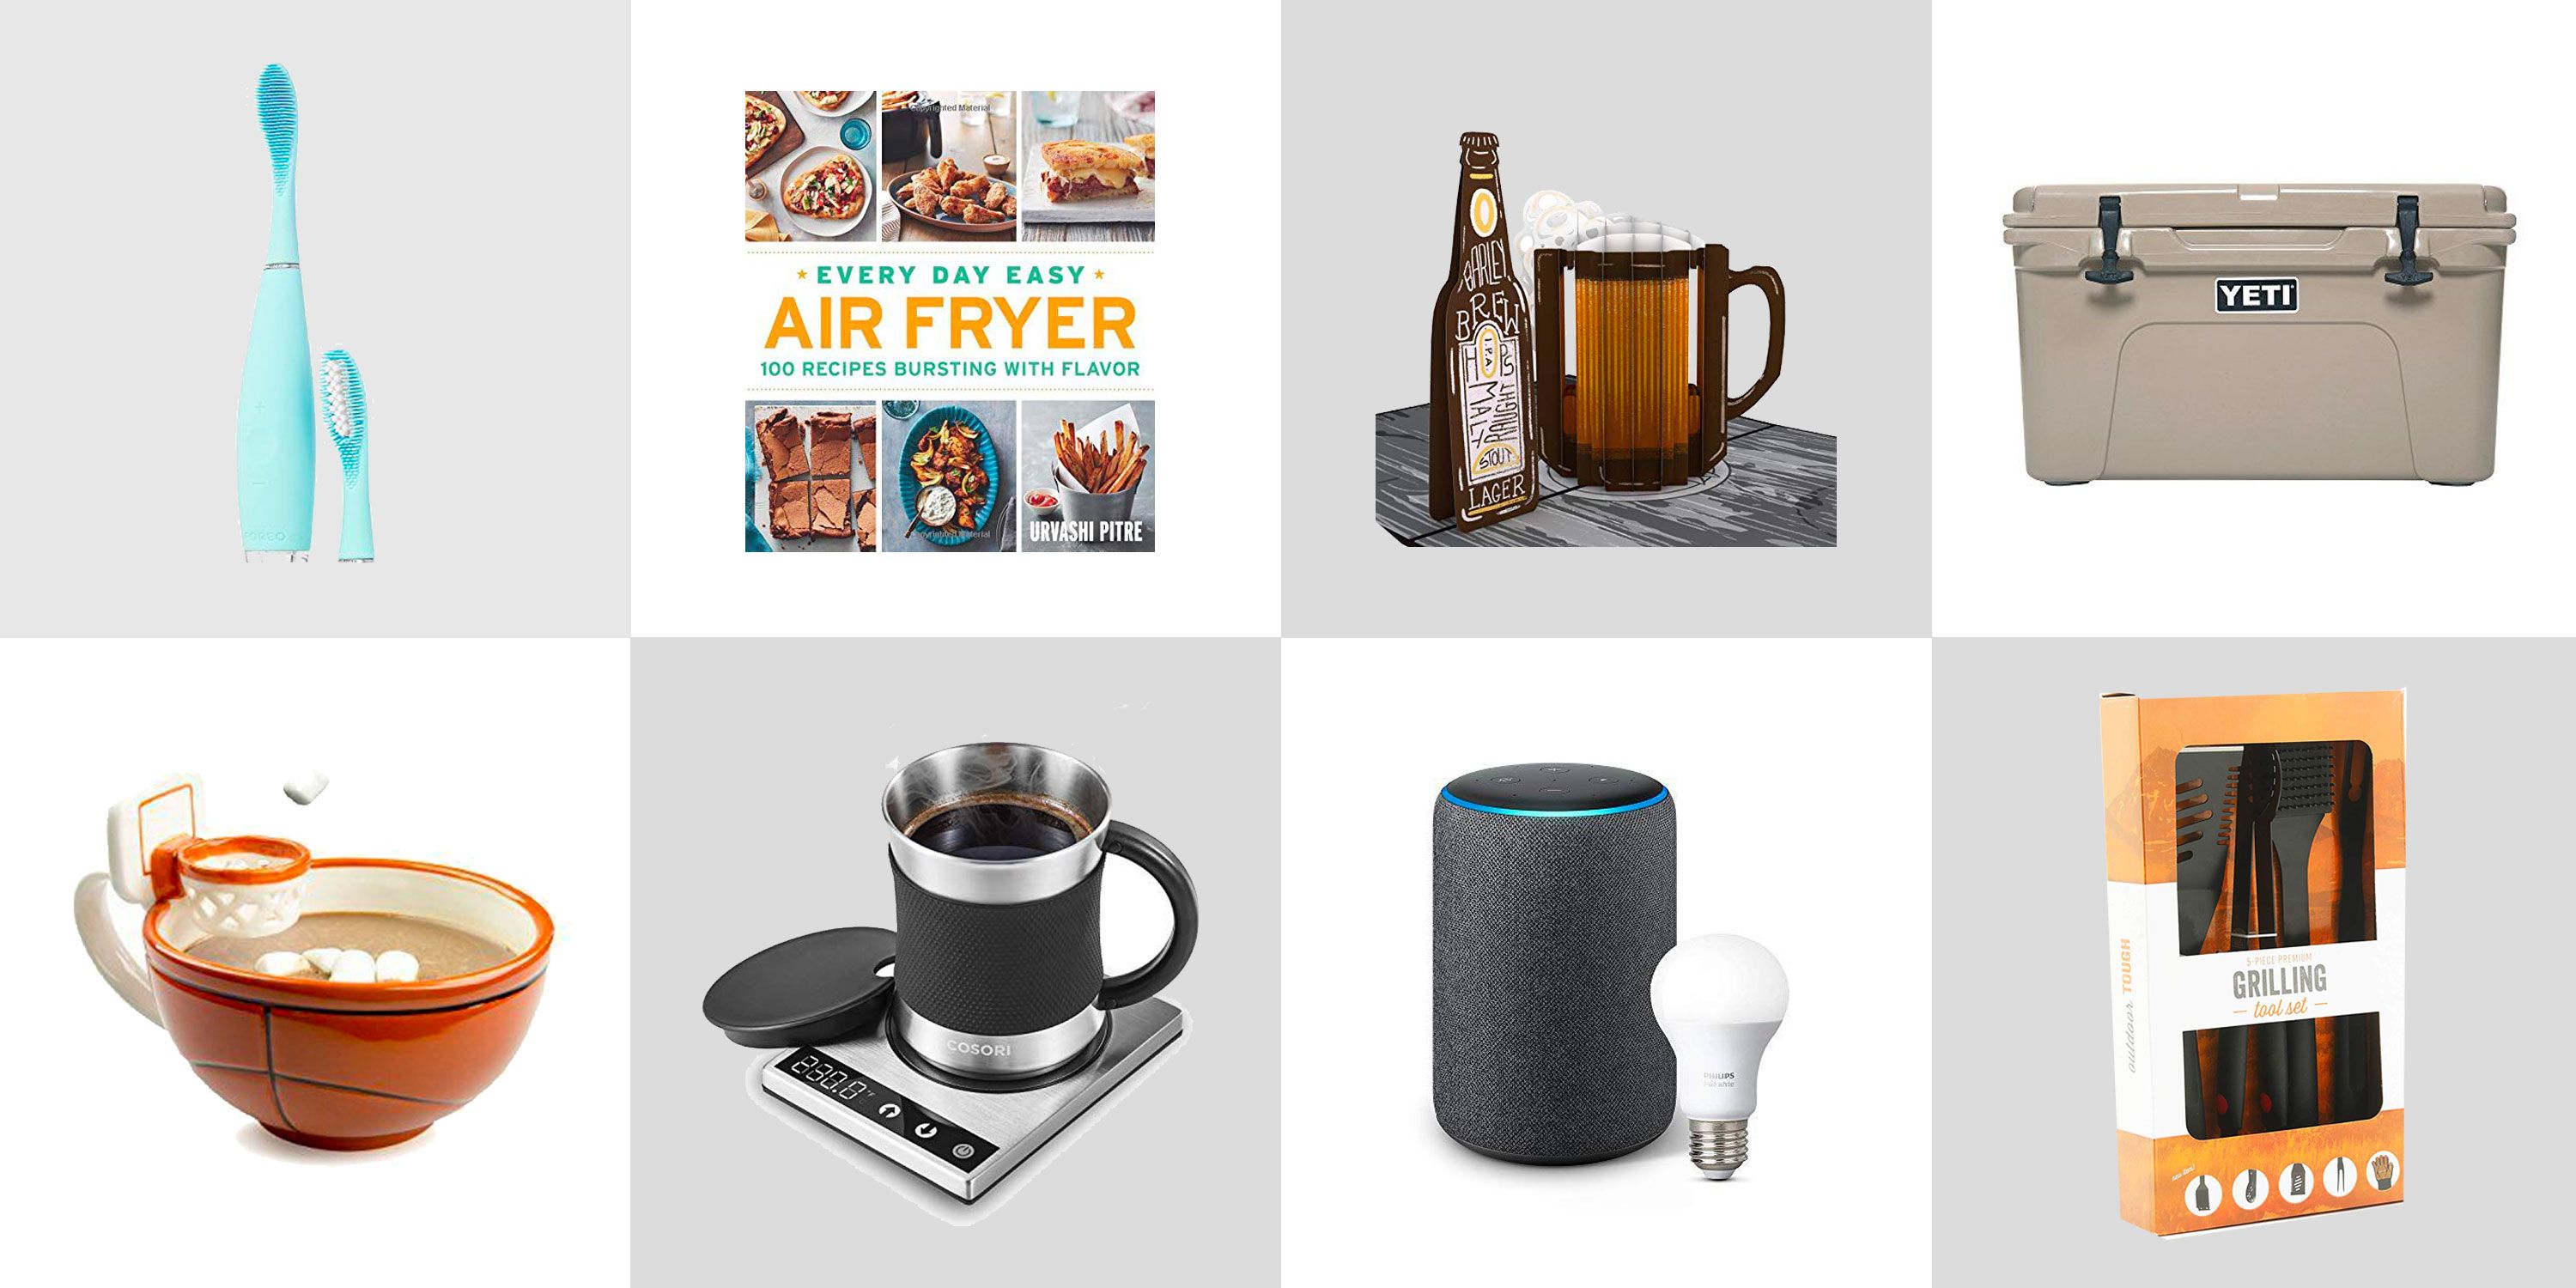 best father's day gifts 2019